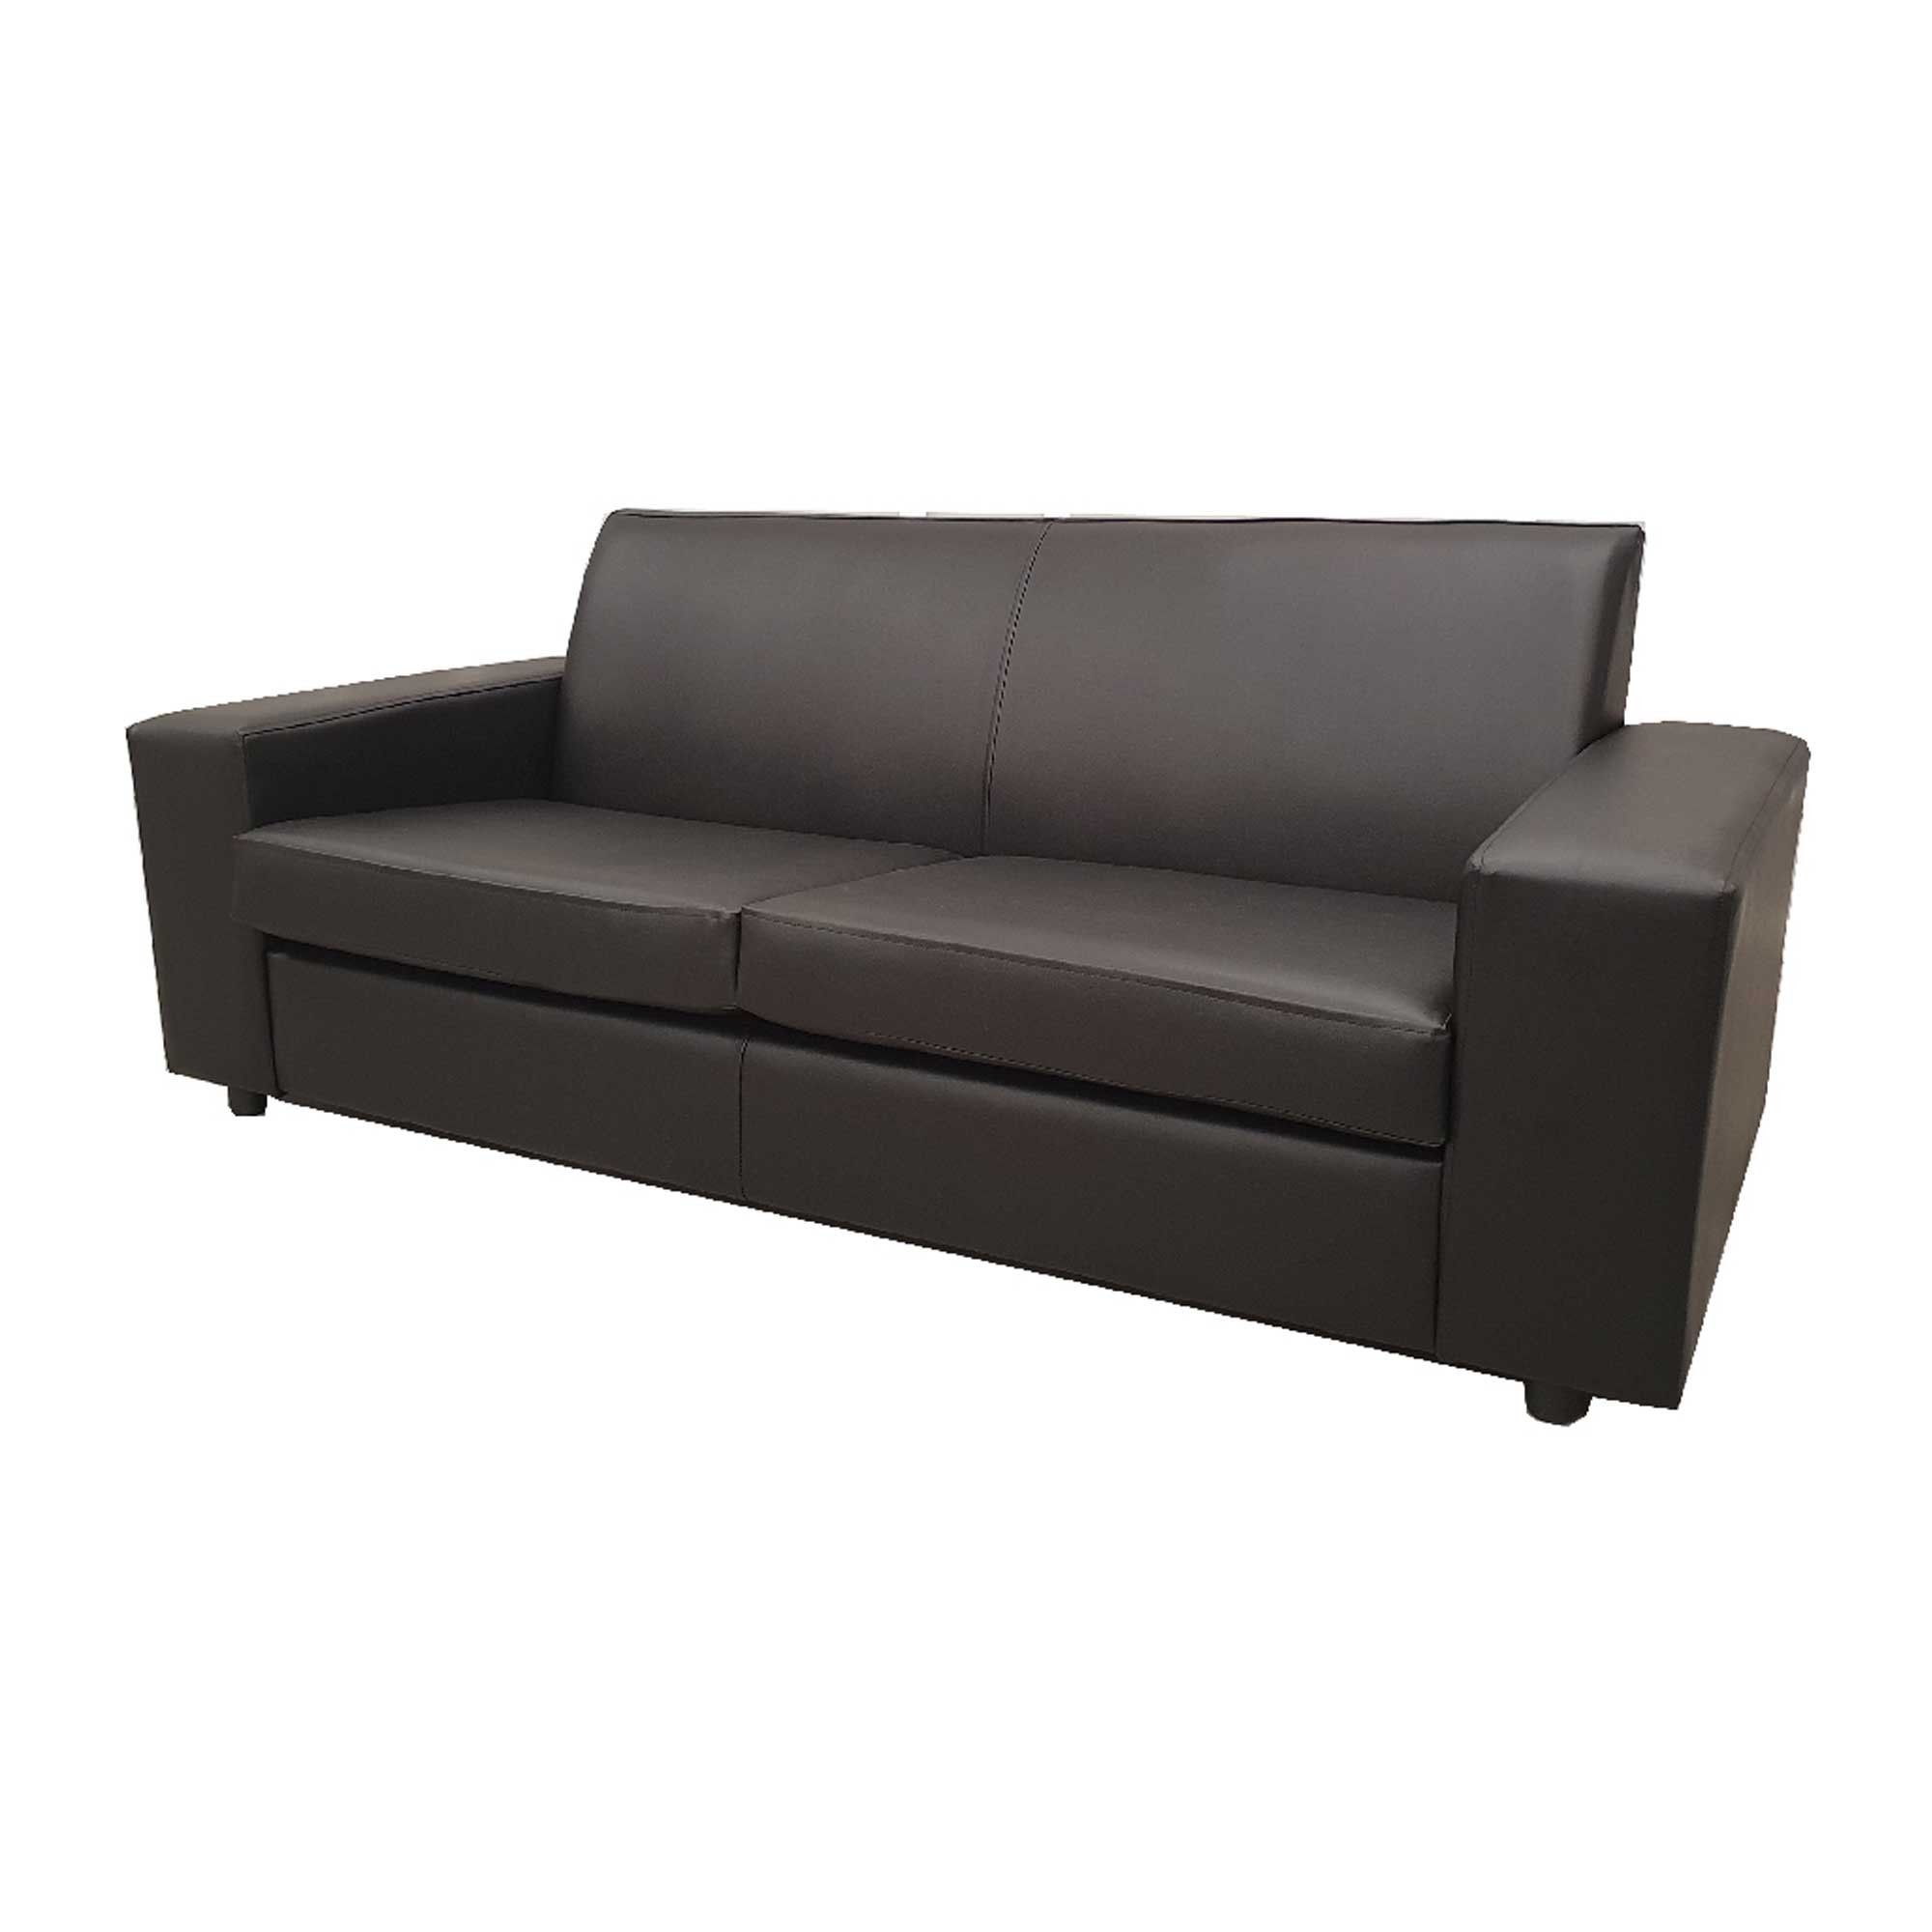 Nevada 3 Seater Black Faux Leather Contract Sofa | Black Sofa Inside Traditional 3 Seater Faux Leather Sofas (View 16 of 20)